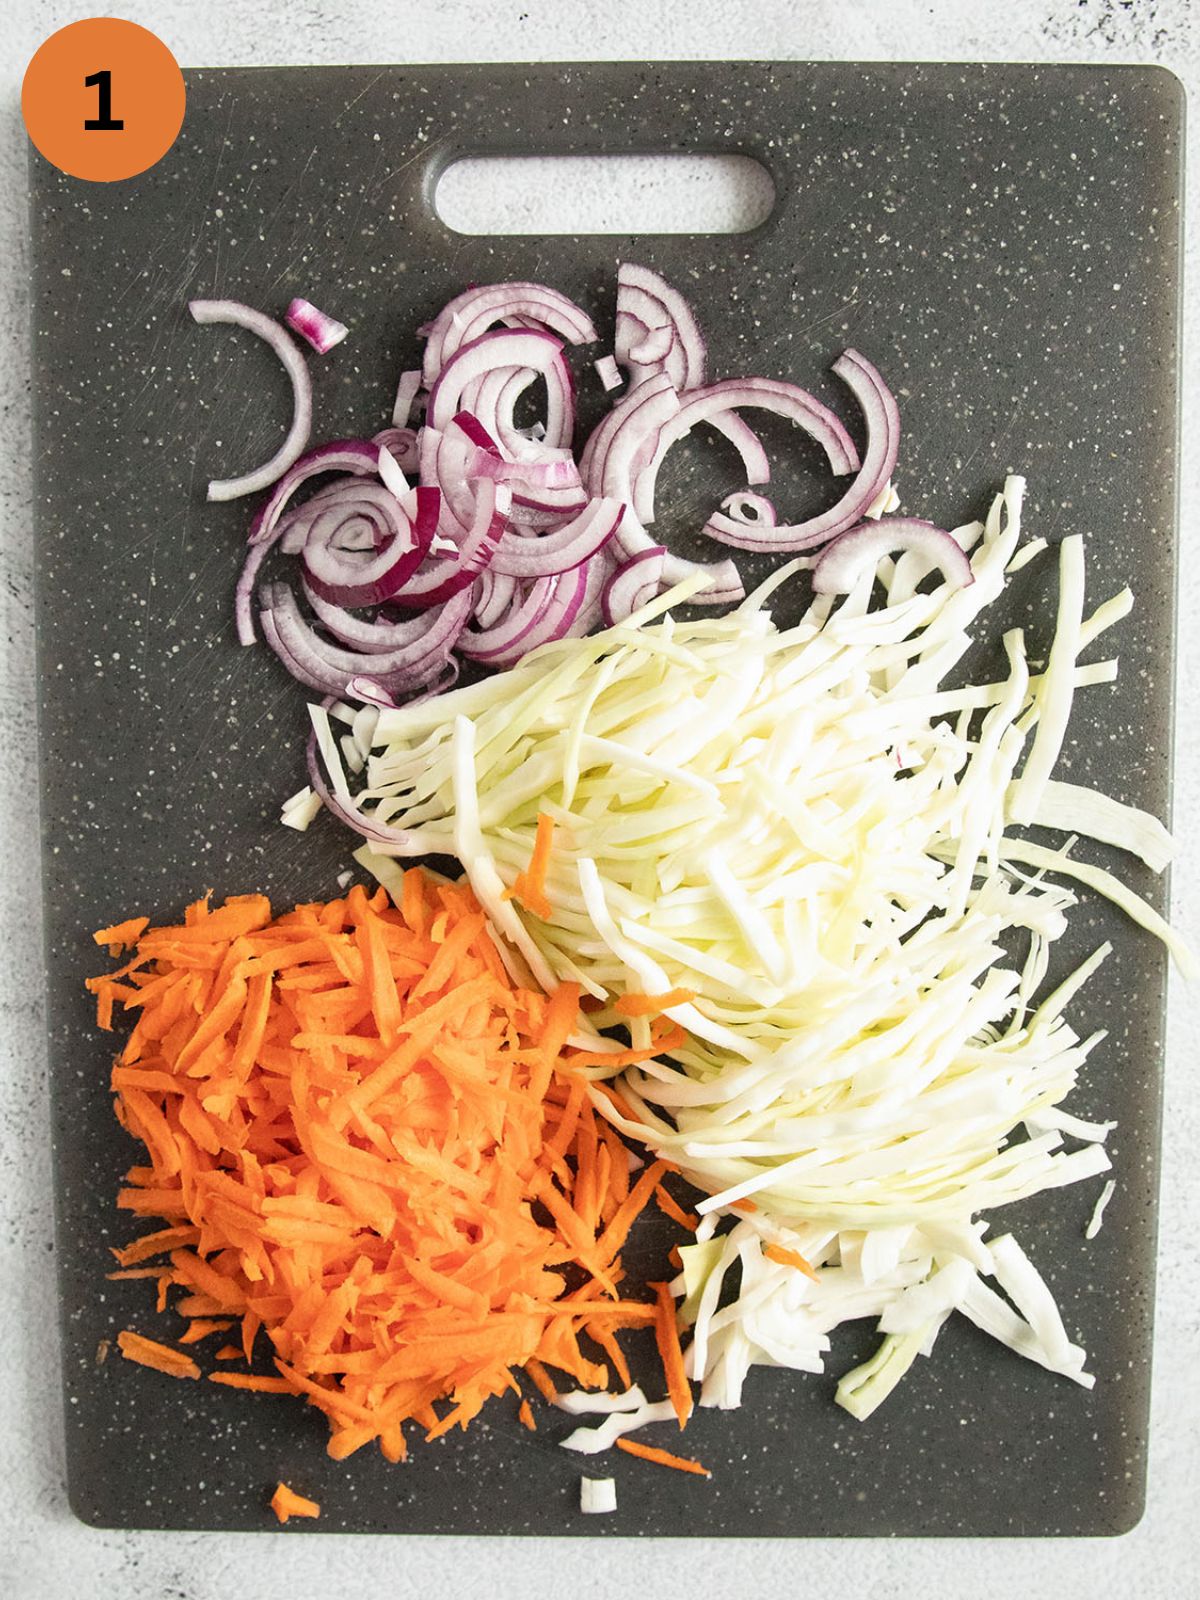 shredded white cabbage, carrots and onions for making slaw on a cutting gray cutting board.